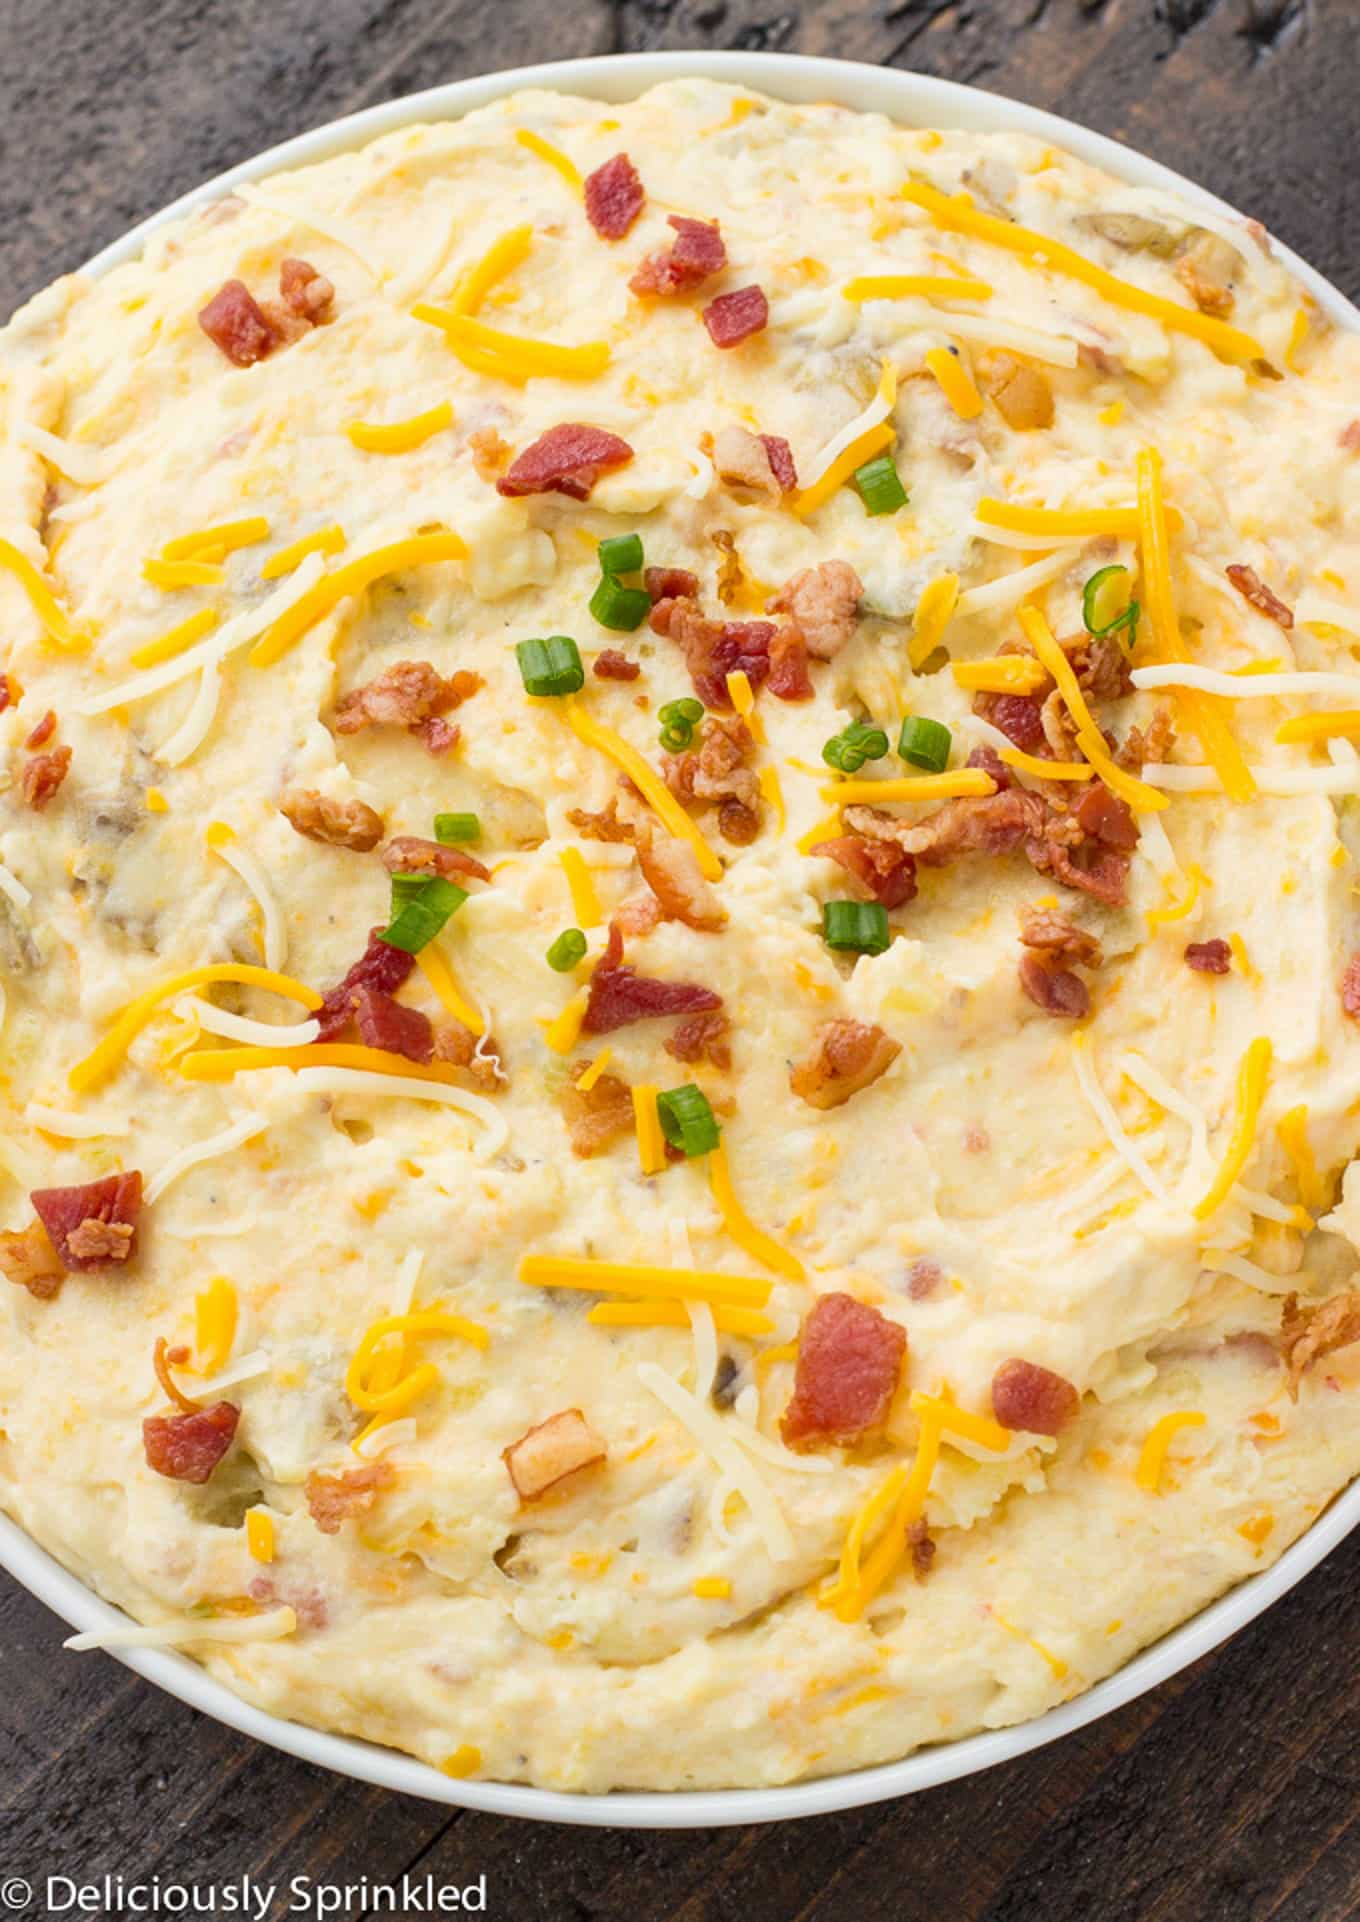 Loaded mashed potatoes topped with some bacon, cheese, and green onions in a serving bowl on the table.